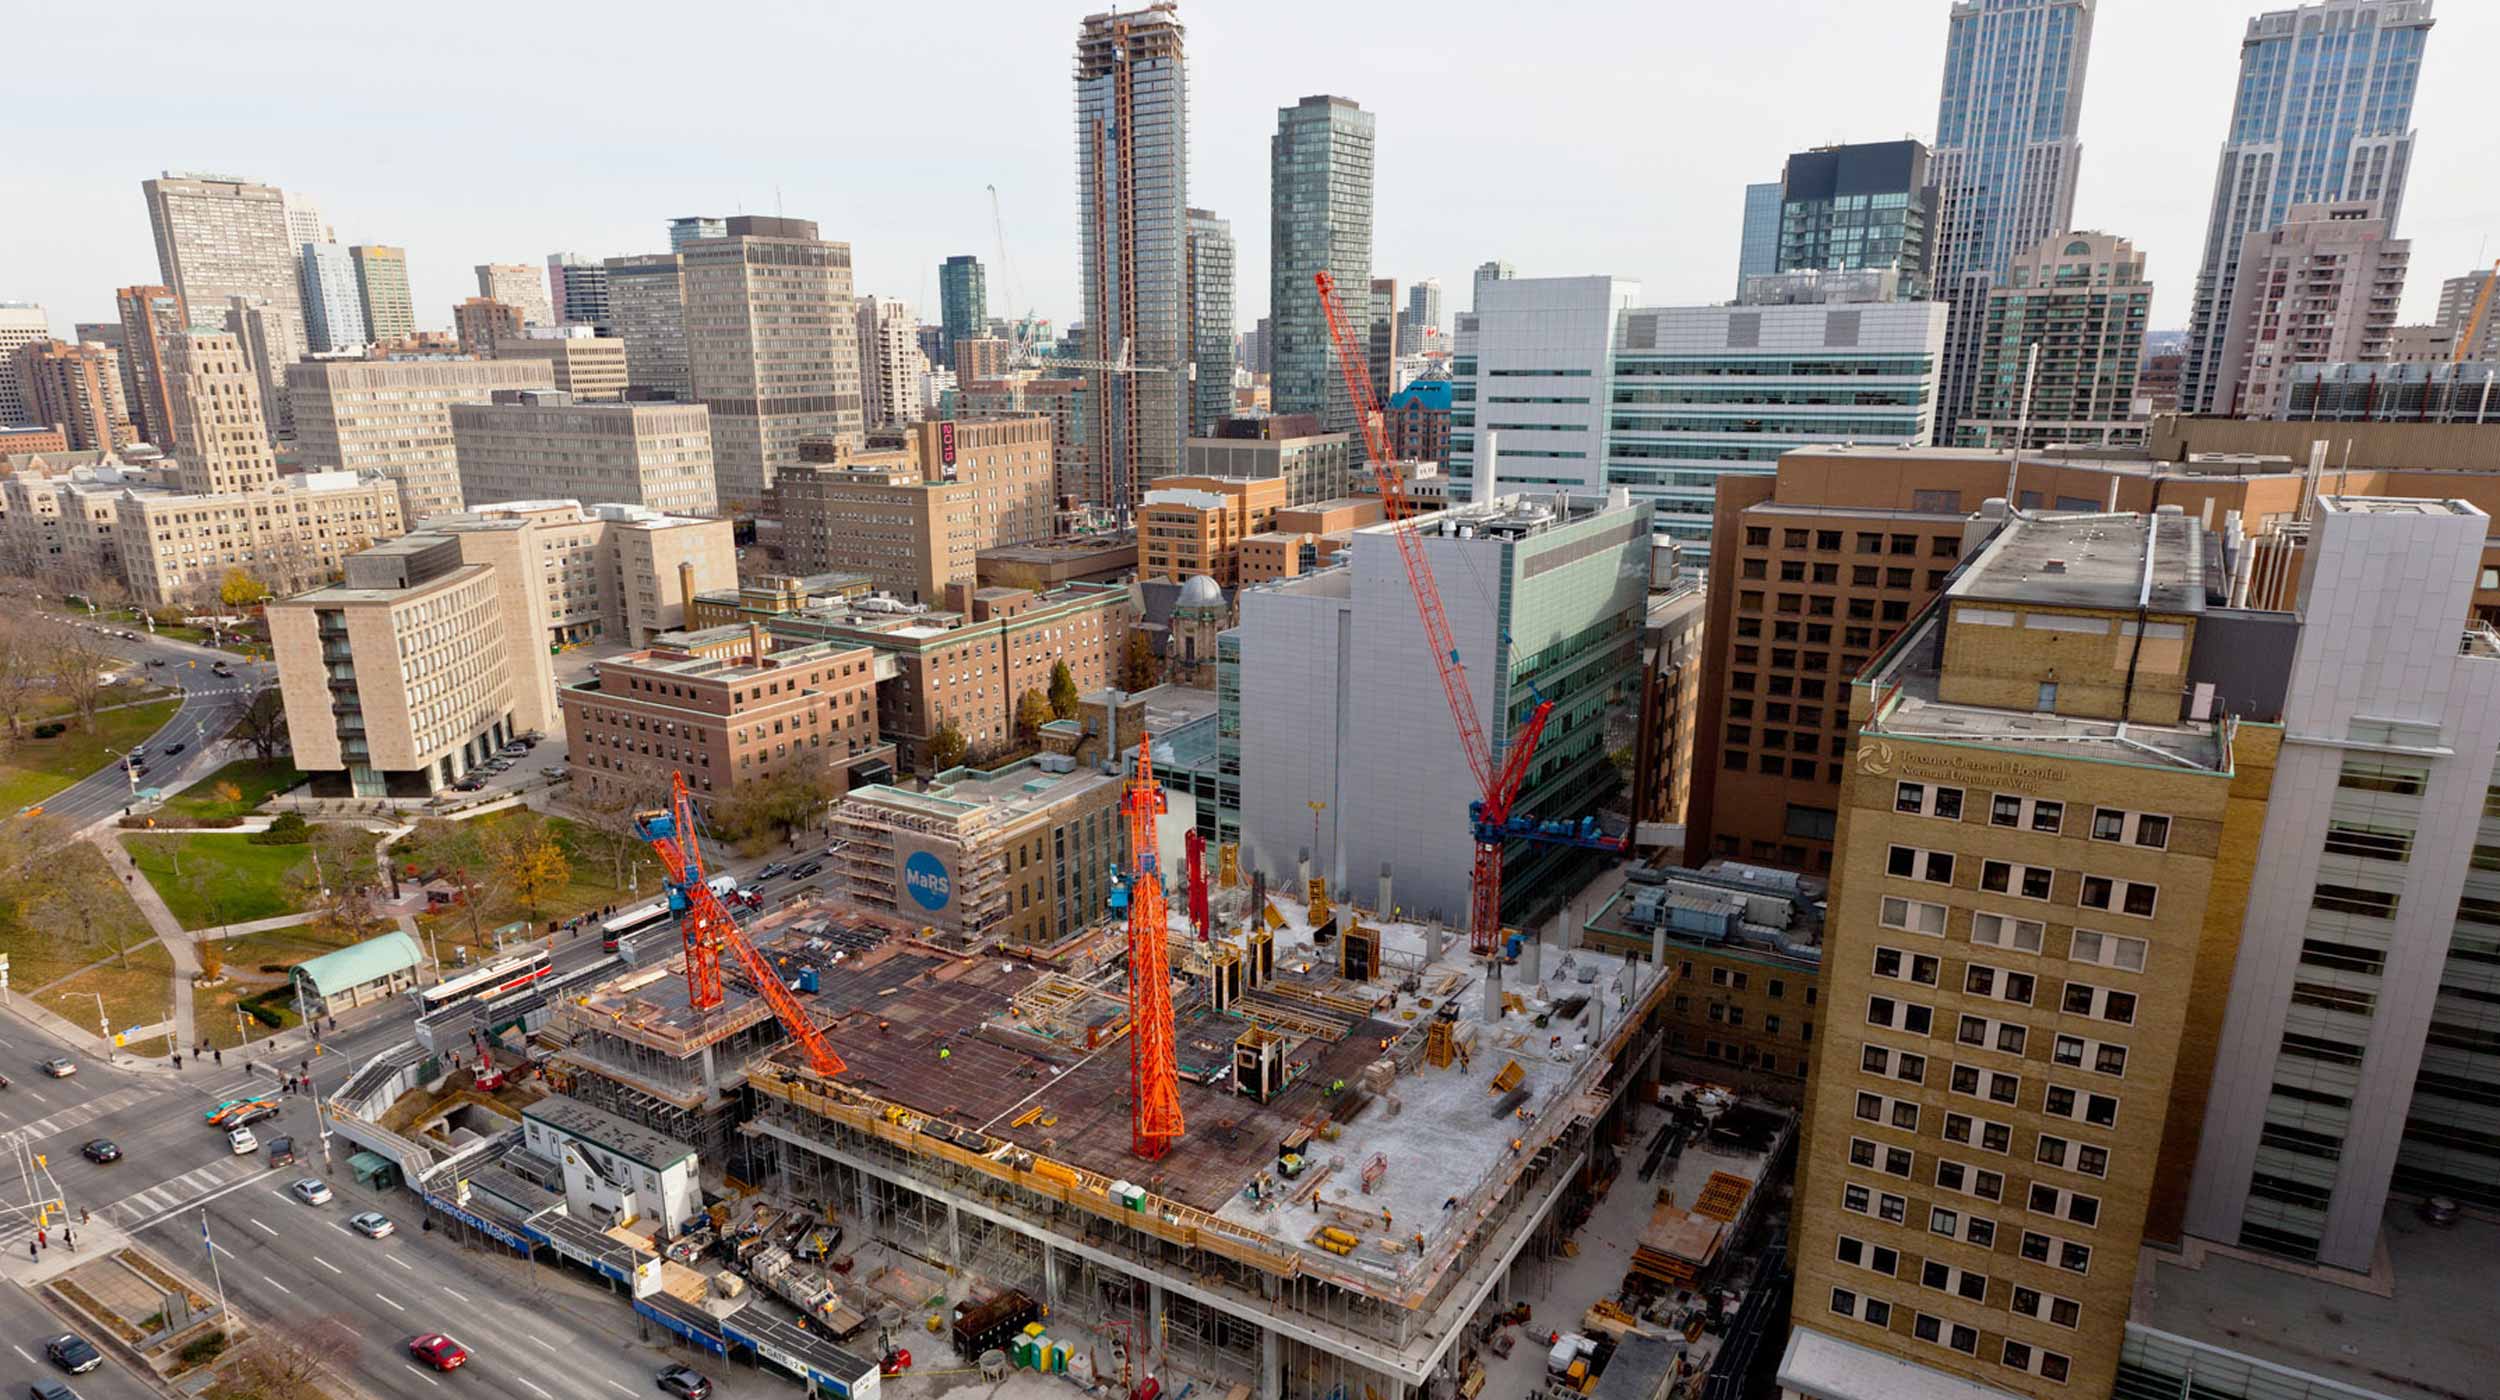 Located in Toronto's Discovery district, the Phase II of the MaRS Centre will add 74,000 m² to the existing complex.